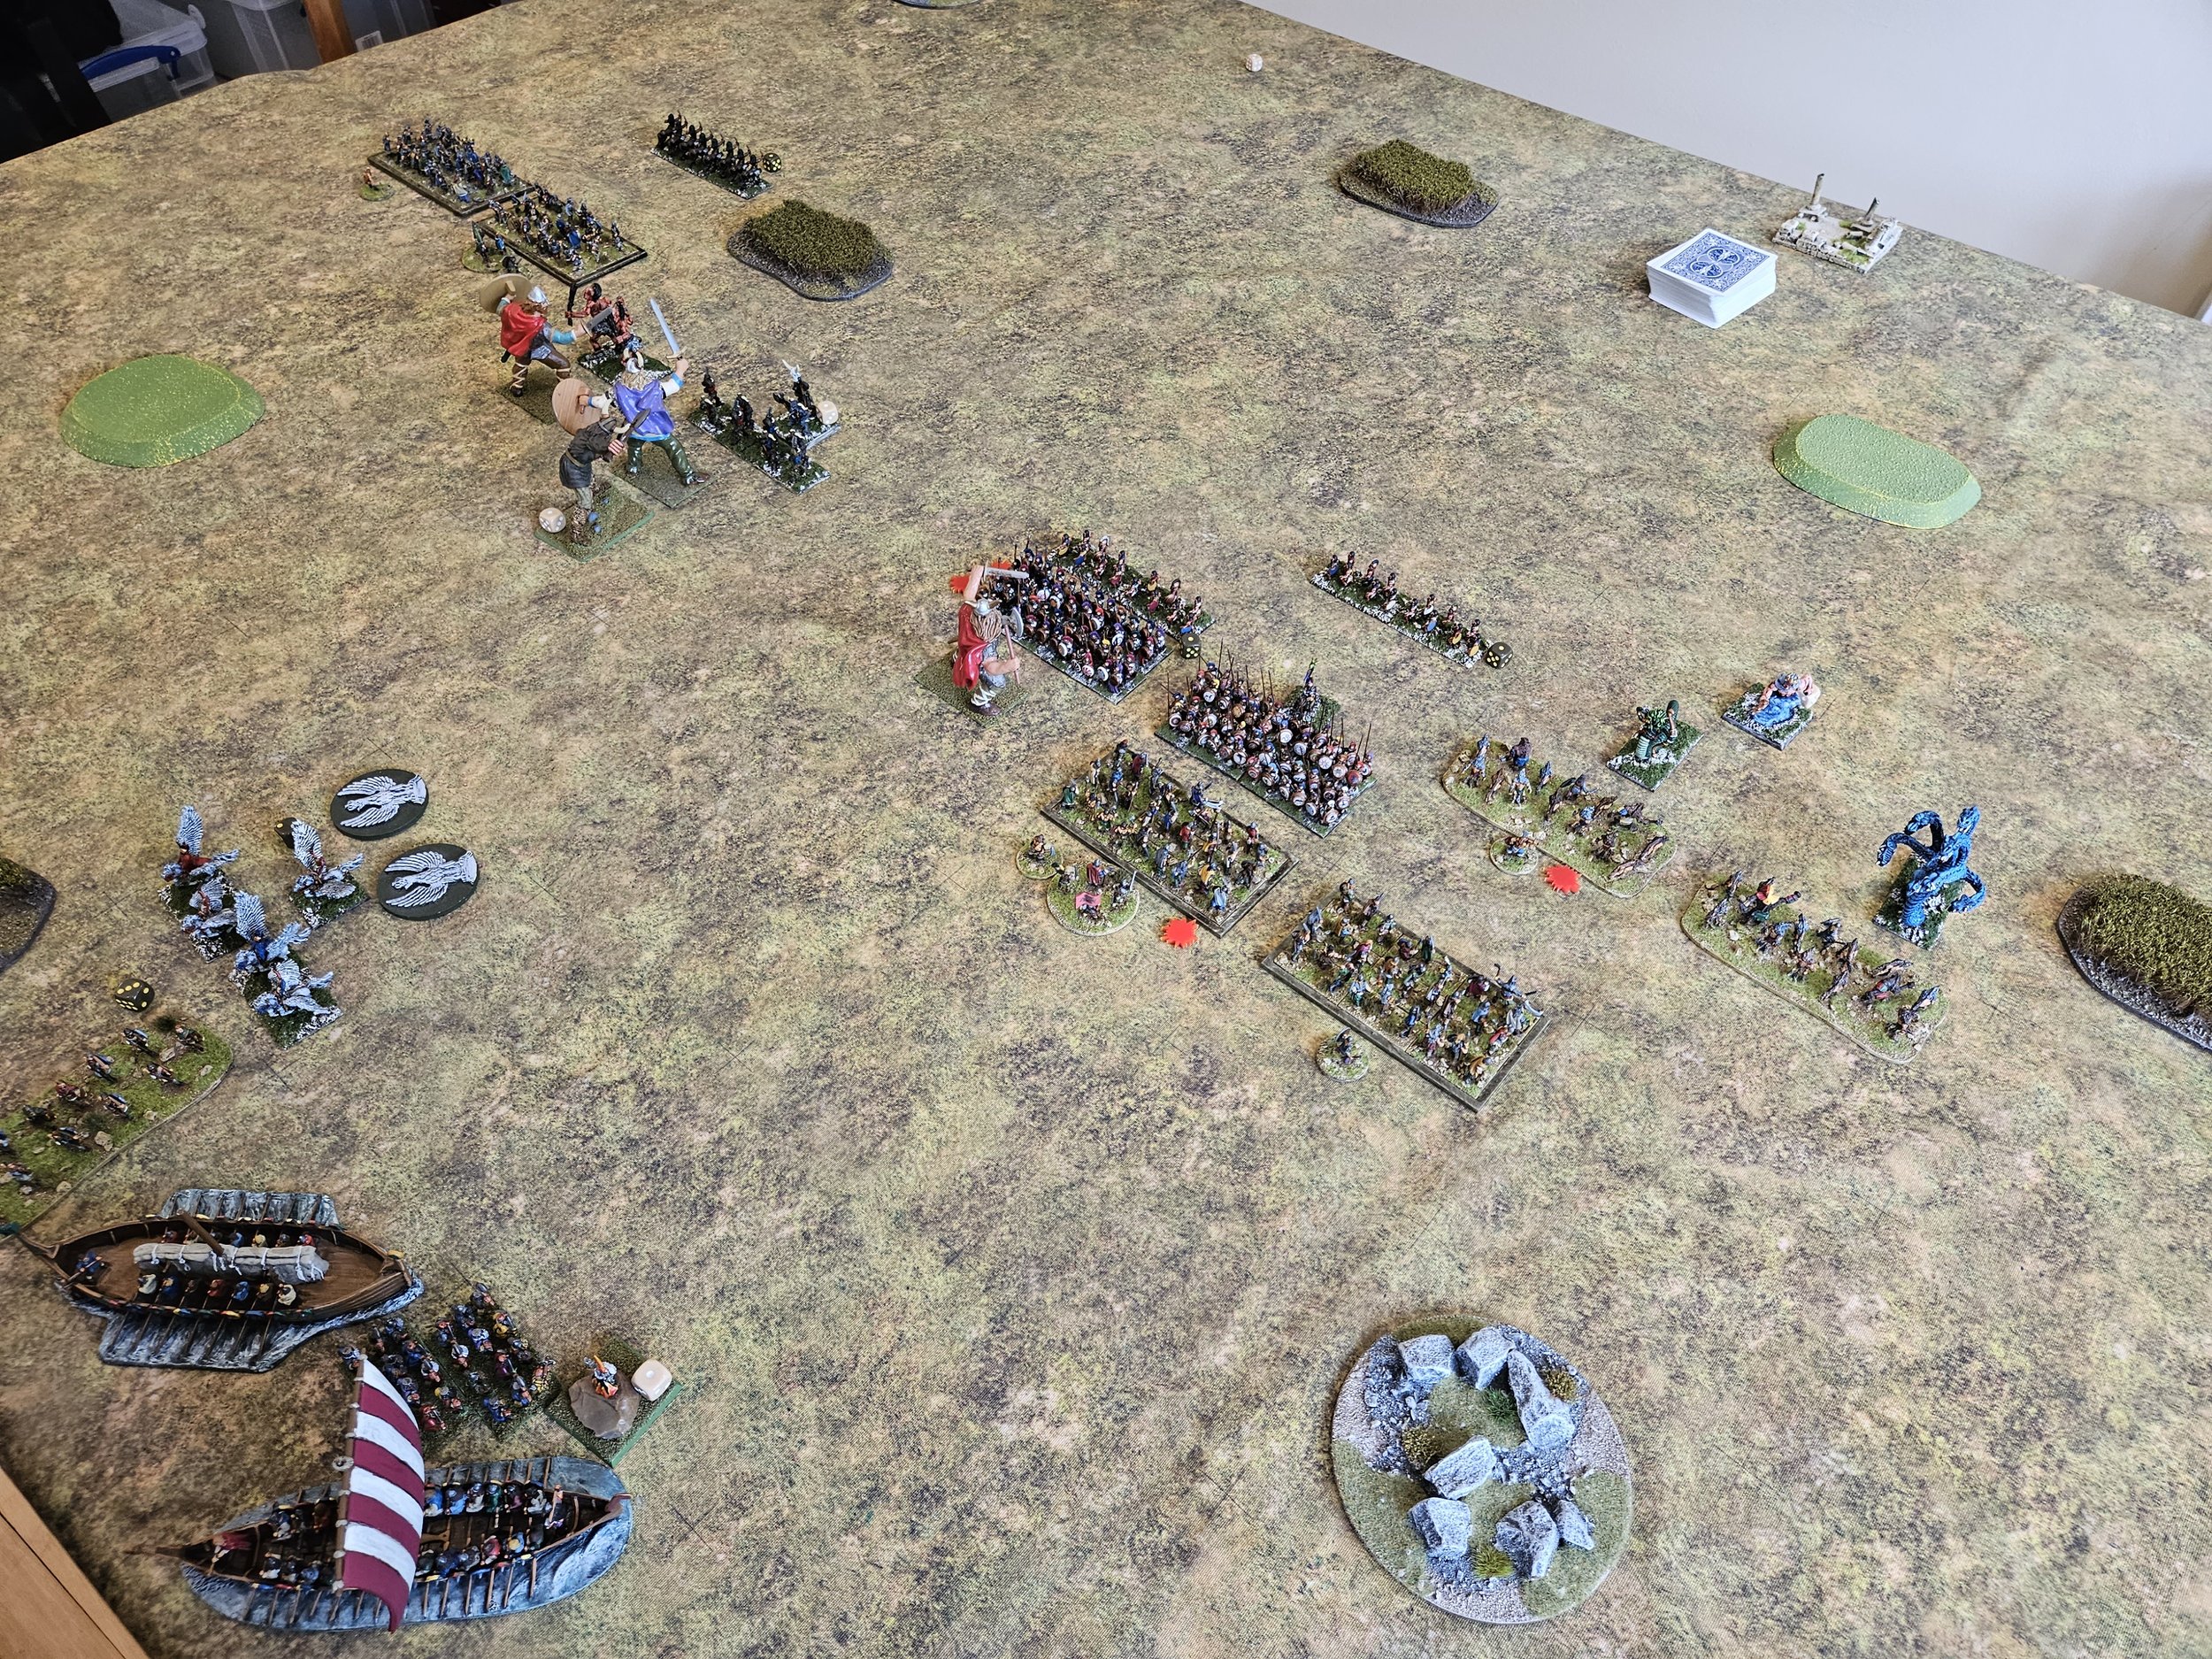  The Pegasus cavalry are hovering way over the enemy camp, waiting for the right moment to strike. A bit like paratroopers, they can take the empty Norse camp (the longboat without the sail) by swooping down into it before the Norse archers intervene